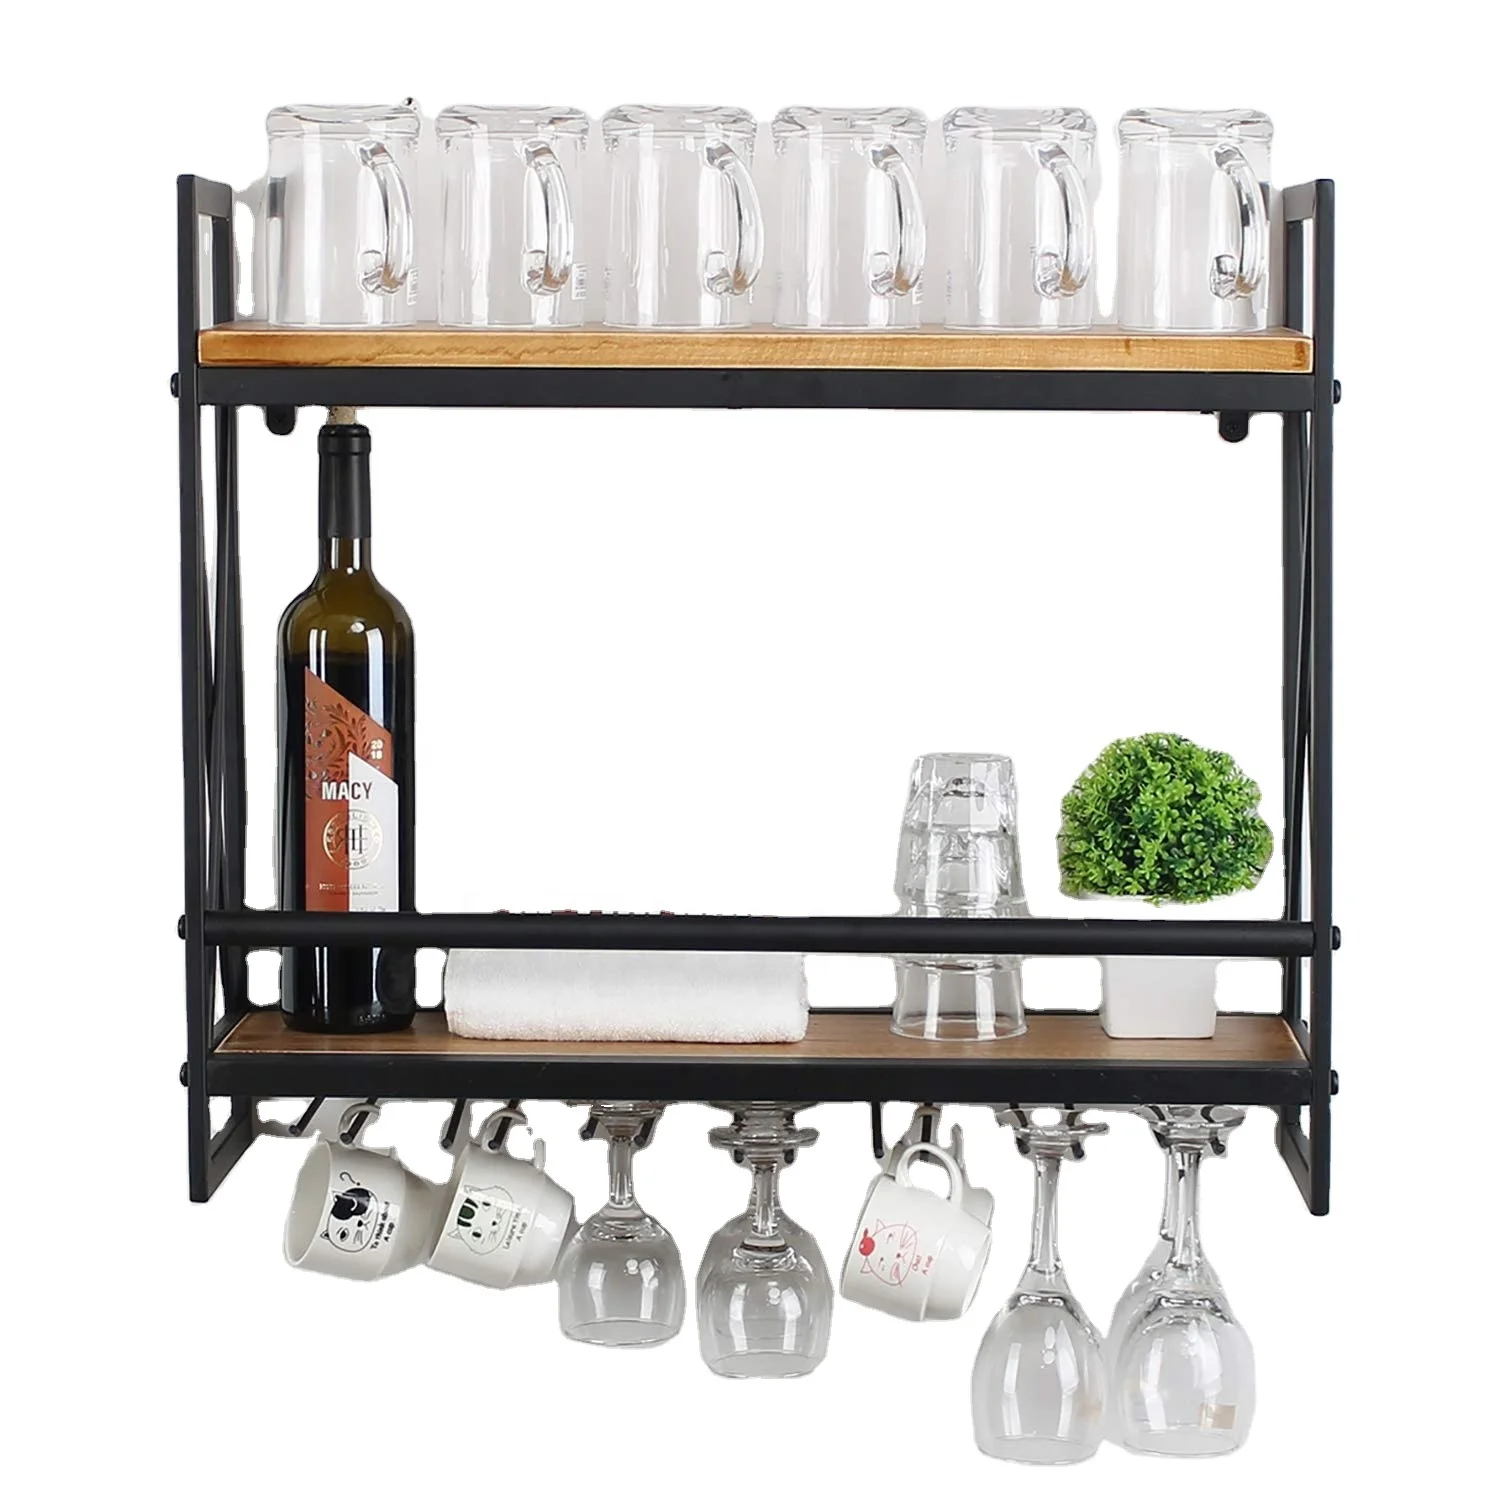 Industrial Wall Mounted Wine Racks,Rustic Metal Hanging Wine Holder Wine Accessories,2-Tiers Wall Mount Bottle Holder Glass Rack,Wood Shelves Wall Shelf with 10 Wine Glass Holder 